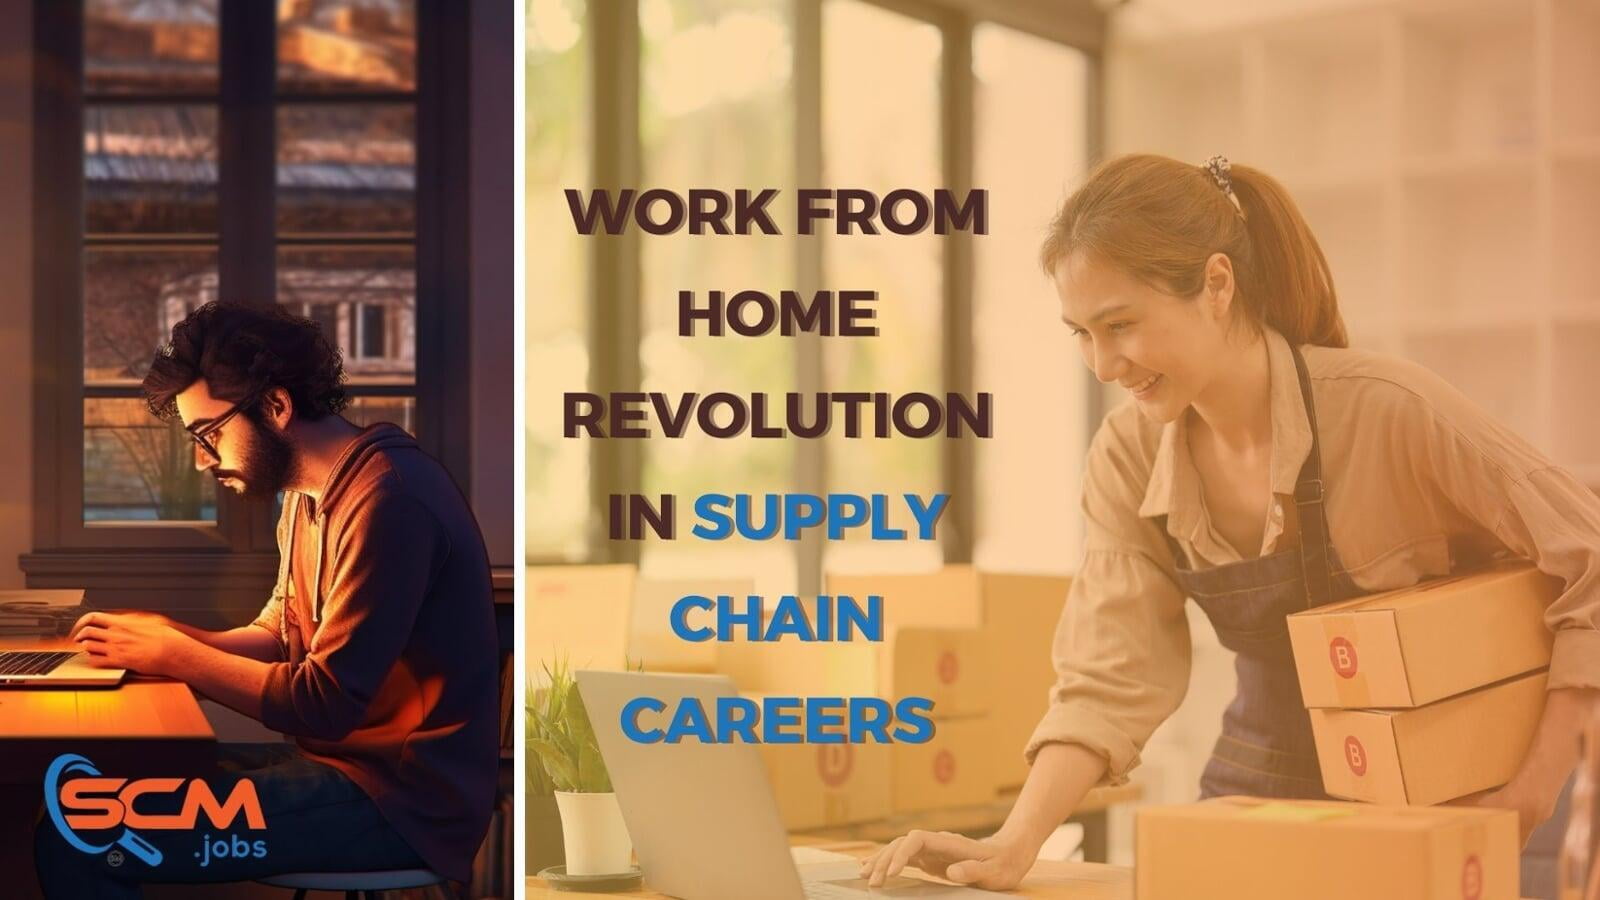 The Work from Home Revolution in Supply Chain Careers